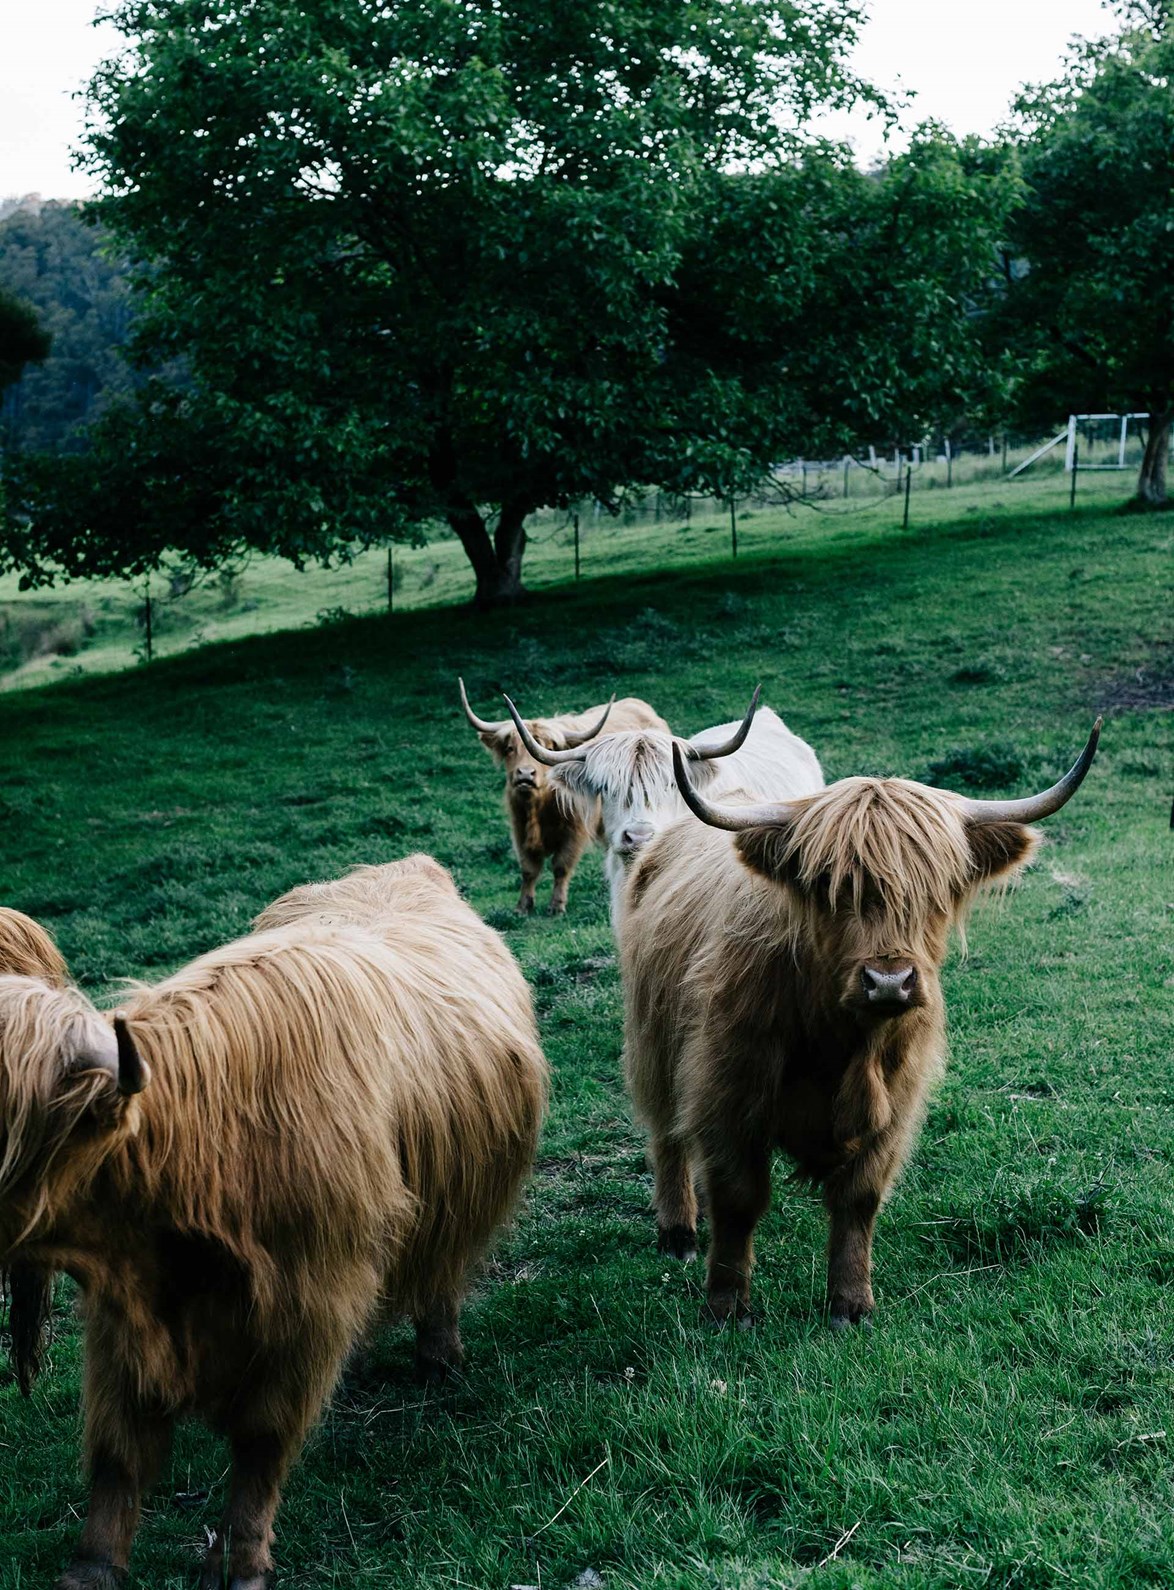 A mob of highland cows named after childhood storybook characters - Wendy, Peter, Alice, Matilda, Tom and Dorothy - have free reign over the luscious green fields surrounding a [renovated farmhouse in Tassie's Huon Valley](https://www.homestolove.com.au/tasmania-farmhouse-huon-valley-19219|target="_blank").